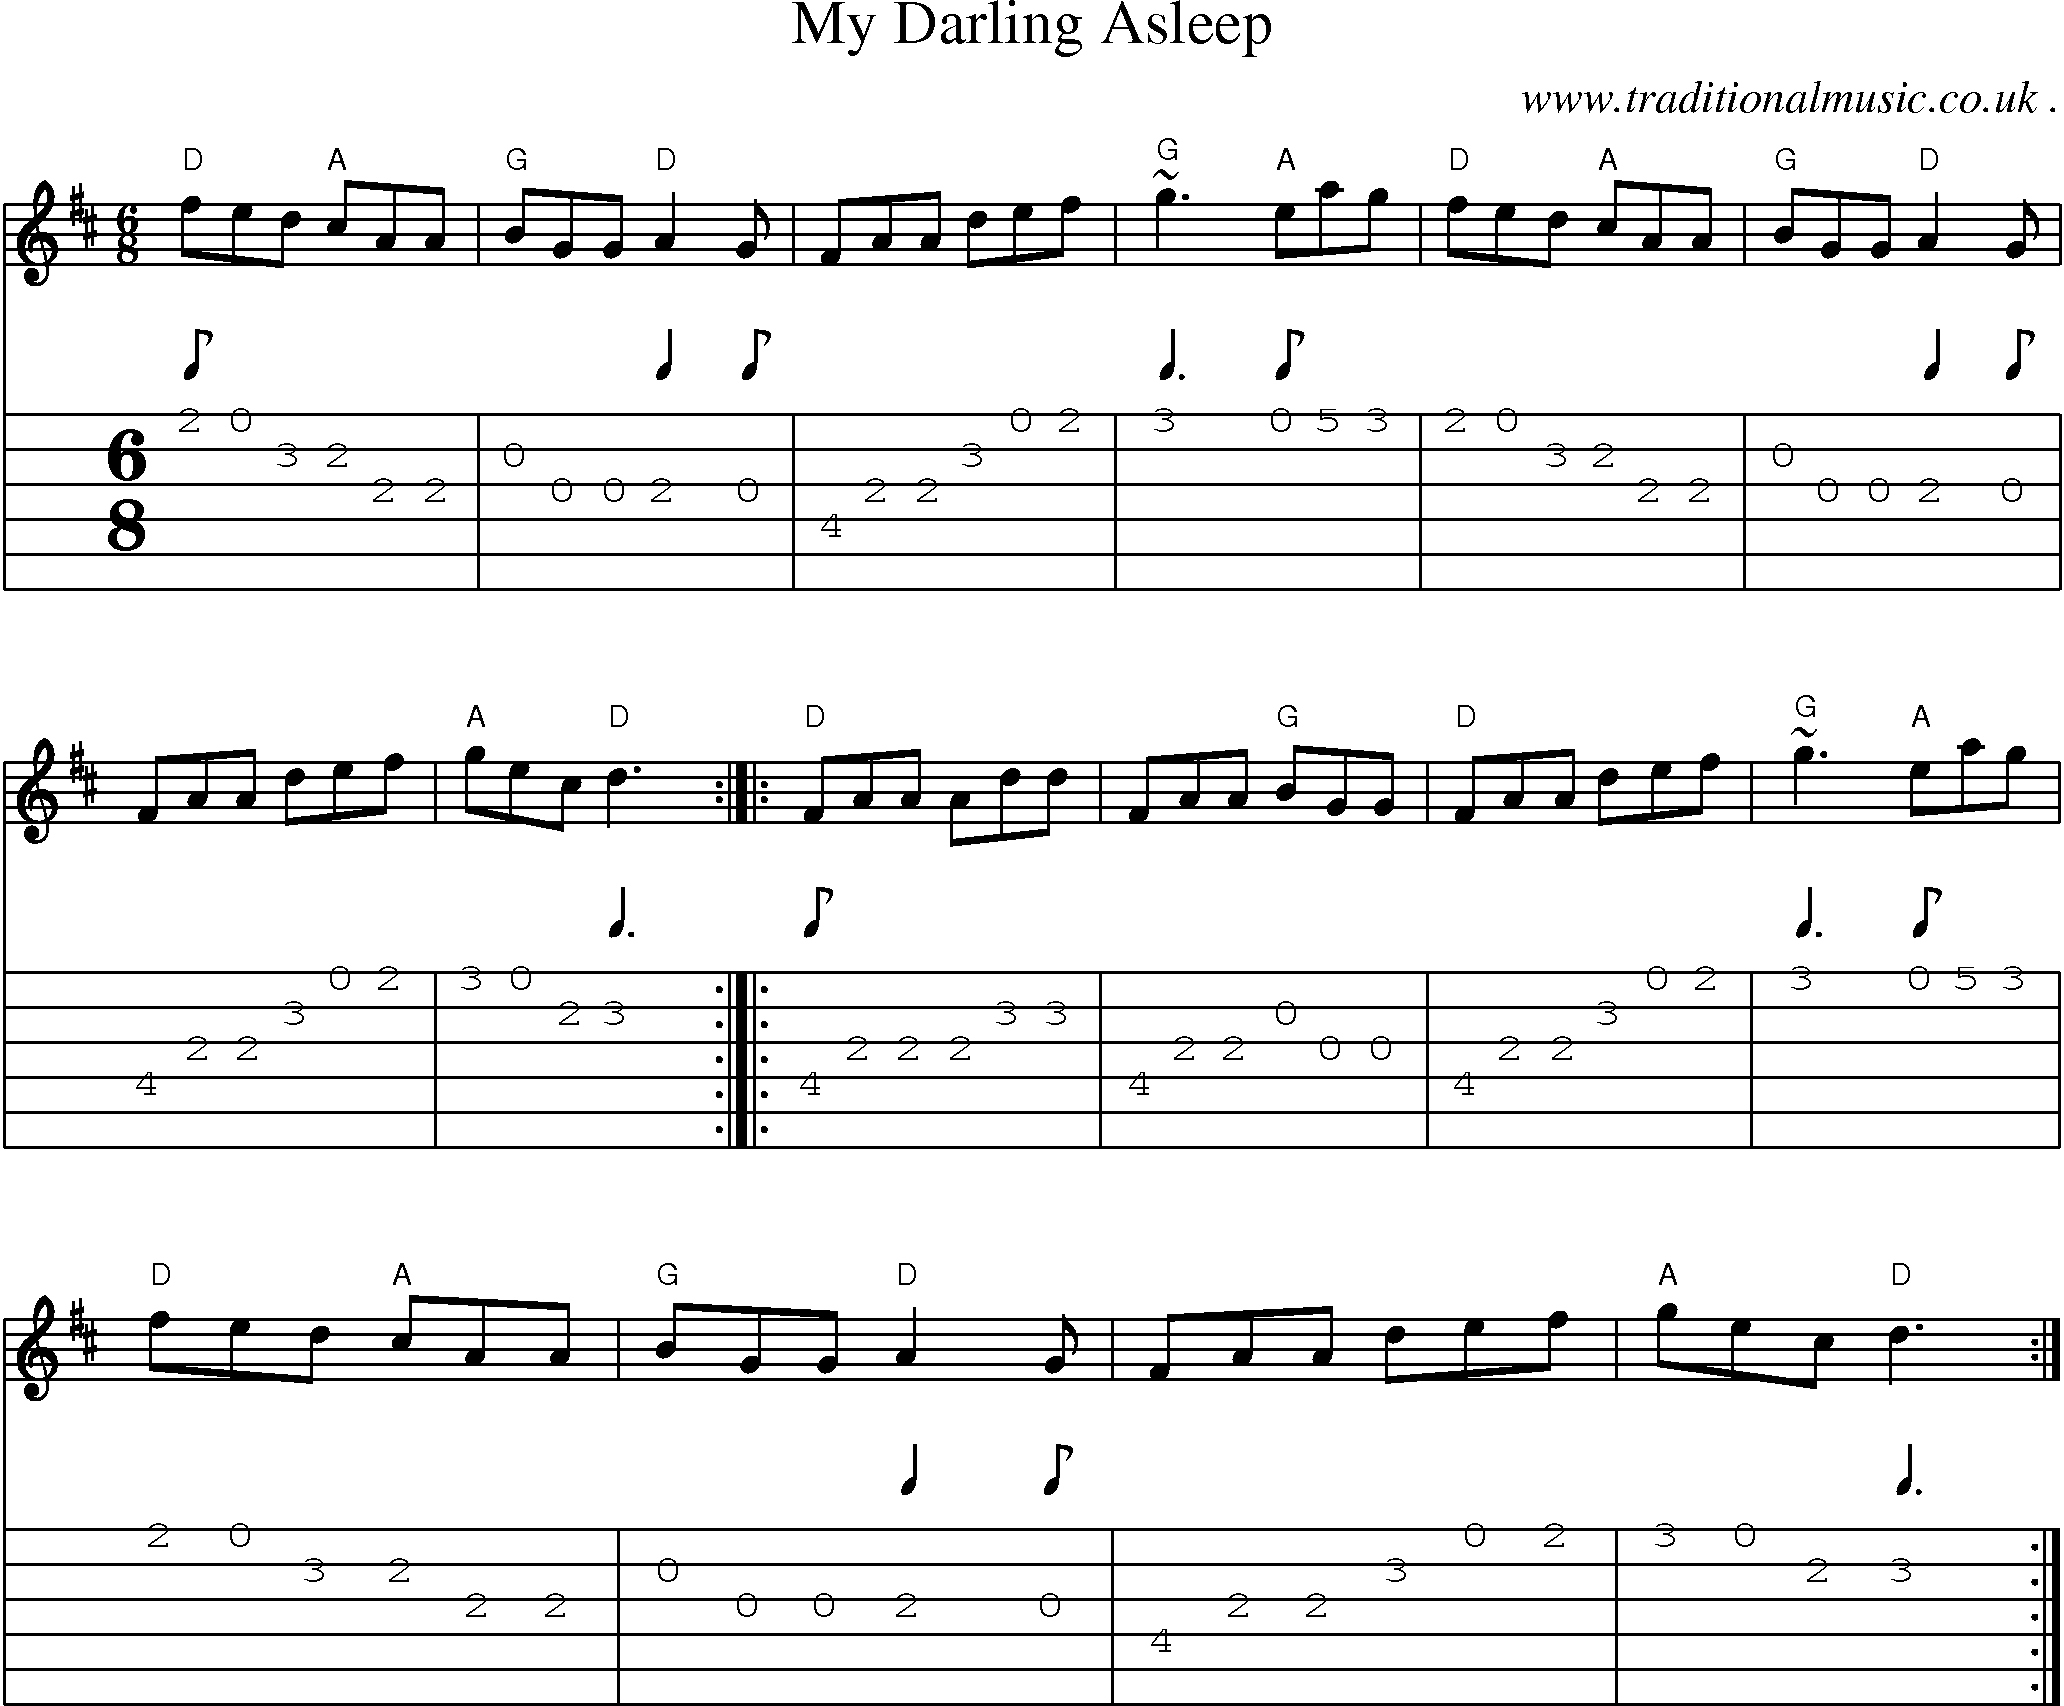 Music Score and Guitar Tabs for My Darling Asleep